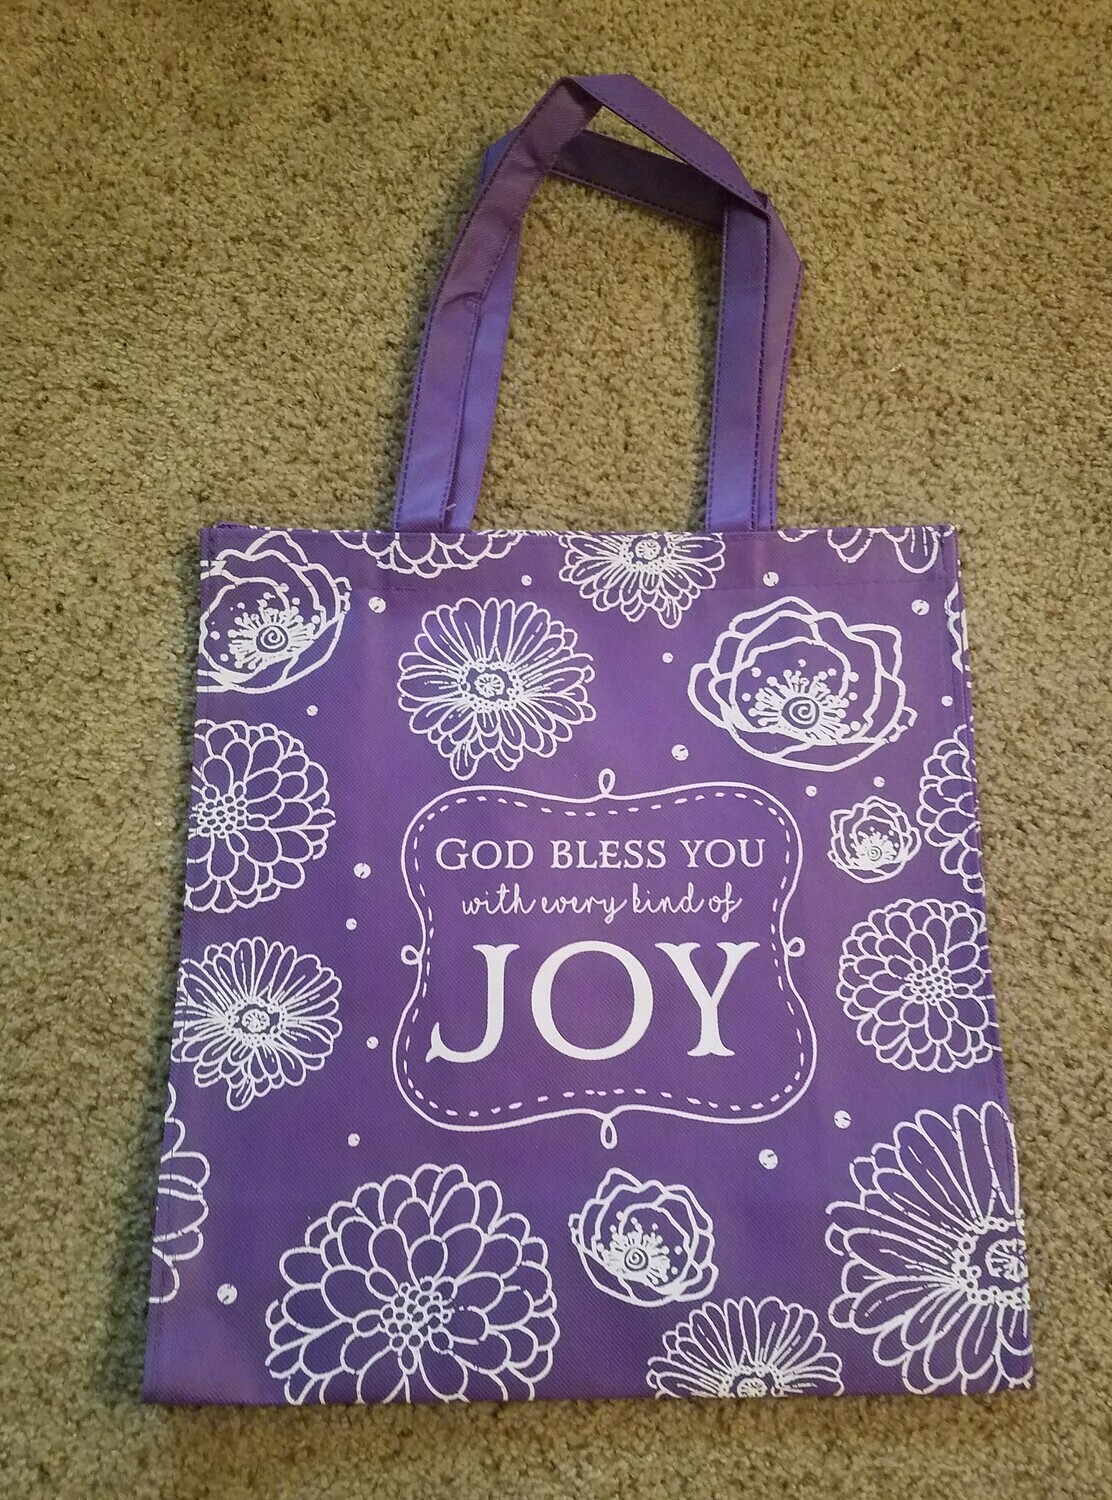 God Bless You with Every Kind of Joy Tote Bag